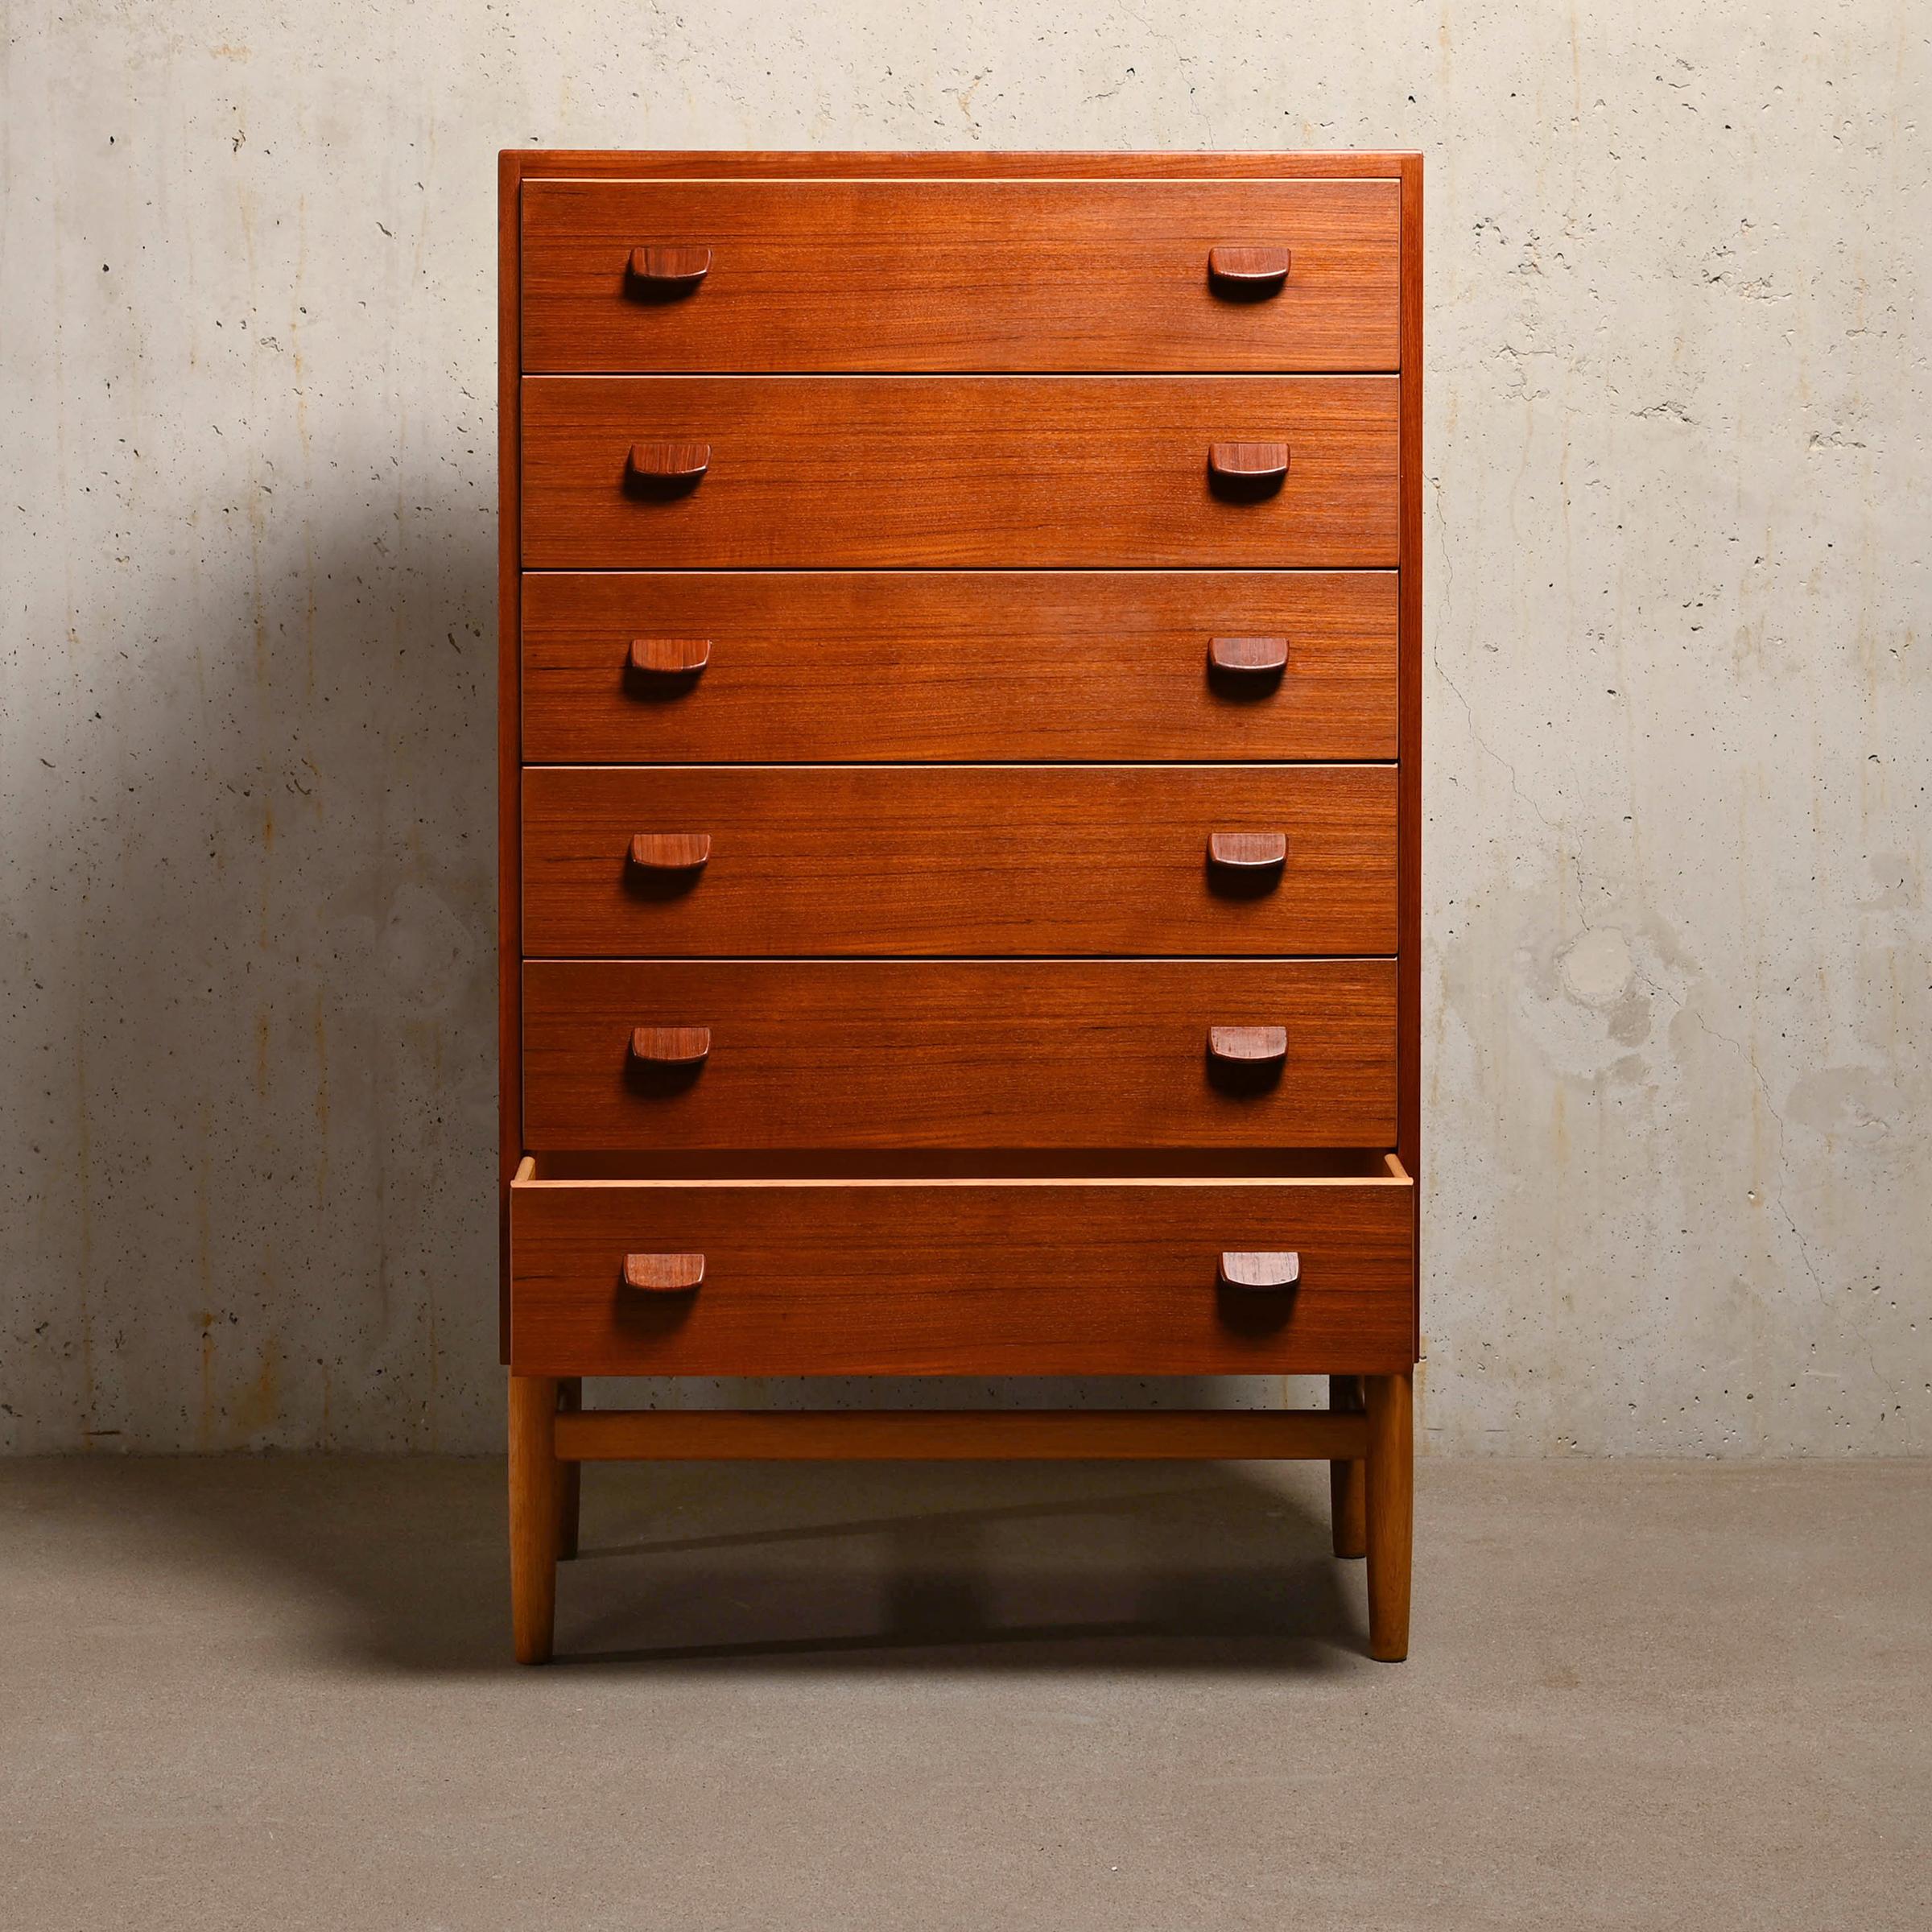 Large chest of drawers designed by Paul Volther for FDB Møbler and manufactured by Tarm Stole & Møbelfabrik, Denmark. The chest of drawers consists of 6 drawers veneered in teak with beautiful detailed handles. The interior is made of beech wood.